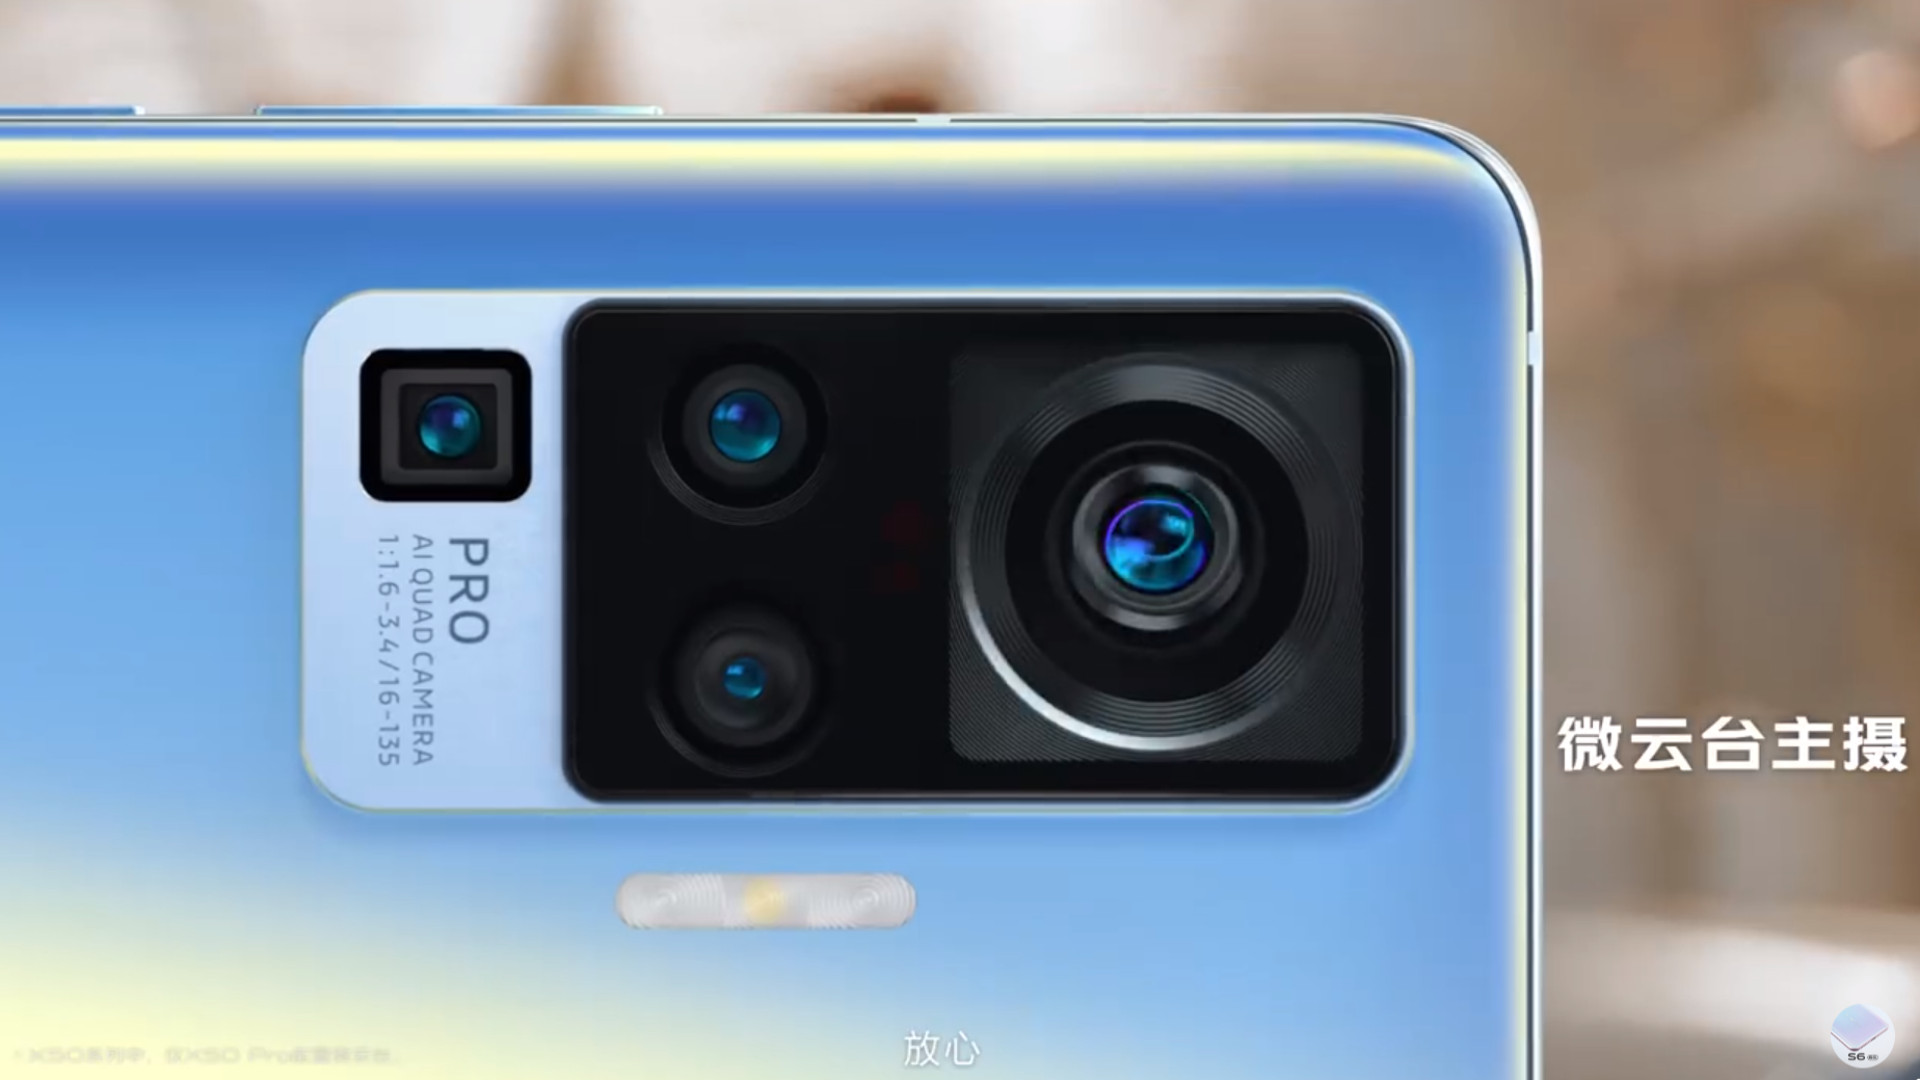 The Vivo X50 is bringing gimbal-style stabilization to smartphones.